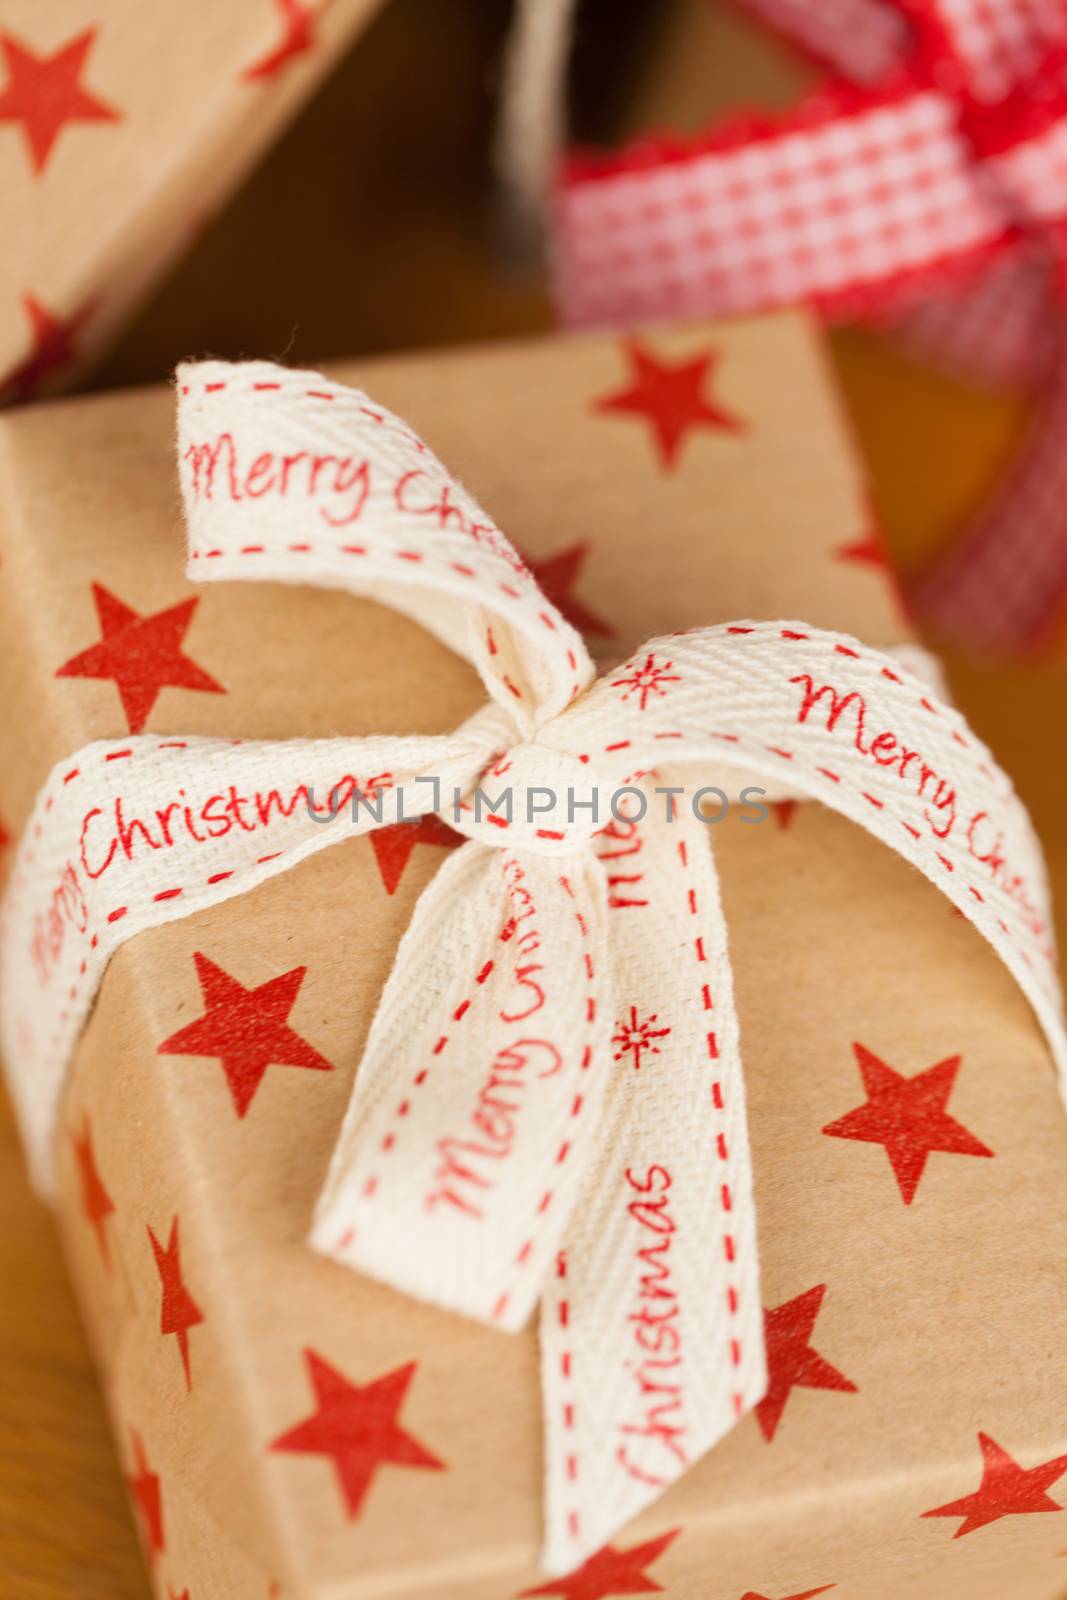 Close up vertical shot of several present boxes in kraft paper decorated with ribbons and red star pattern, on wooden surface